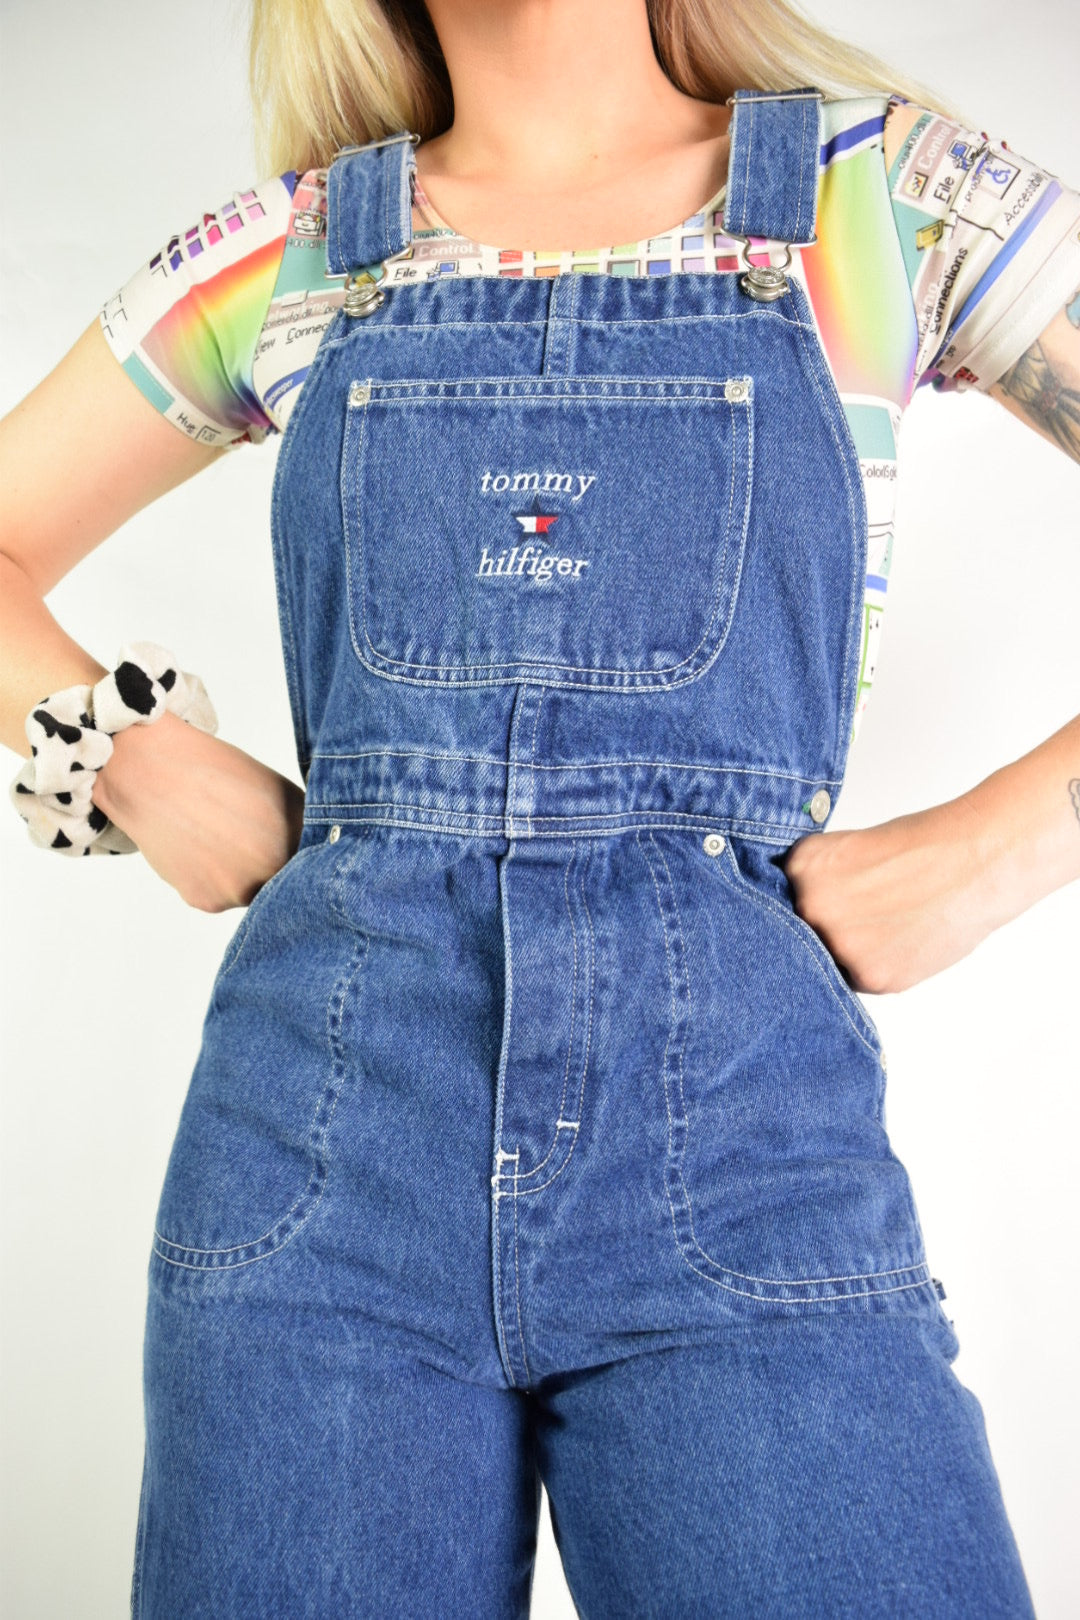 90s TOMMY HILFIGER OVERALLS - XS/S